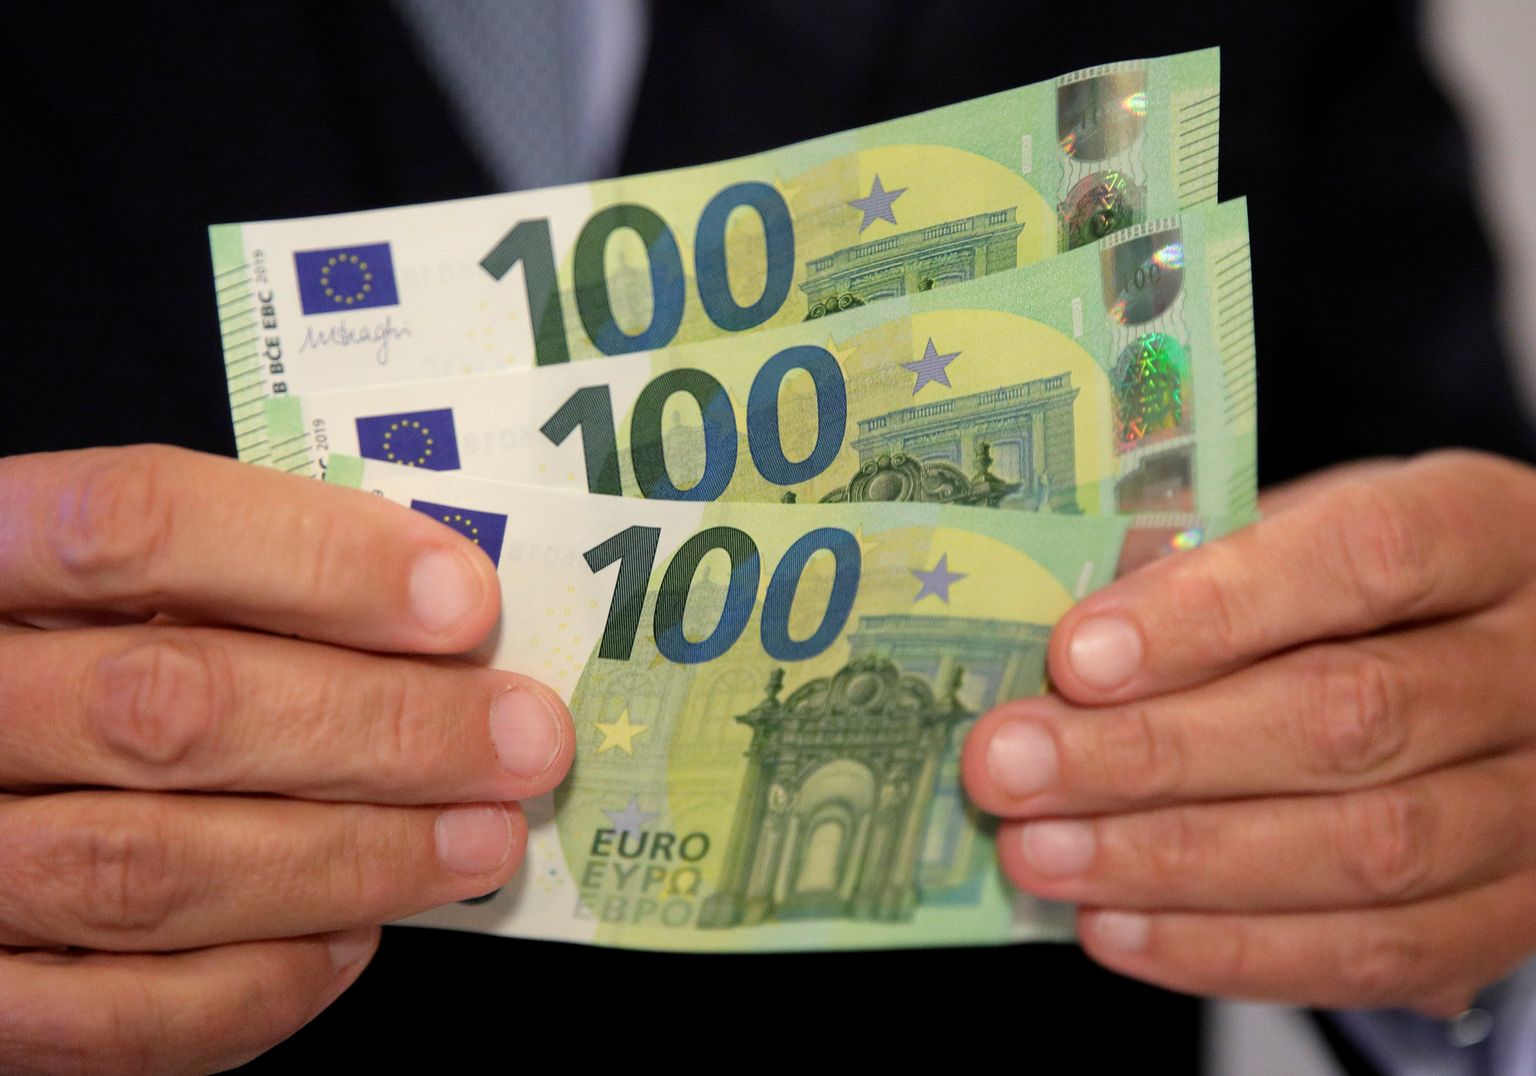 FILE PHOTO: An Austrian central bank official displays new 100 euro banknotes in Vienna, Austria, September 17, 2018. REUTERS/Heinz-Peter Bader/File Photo